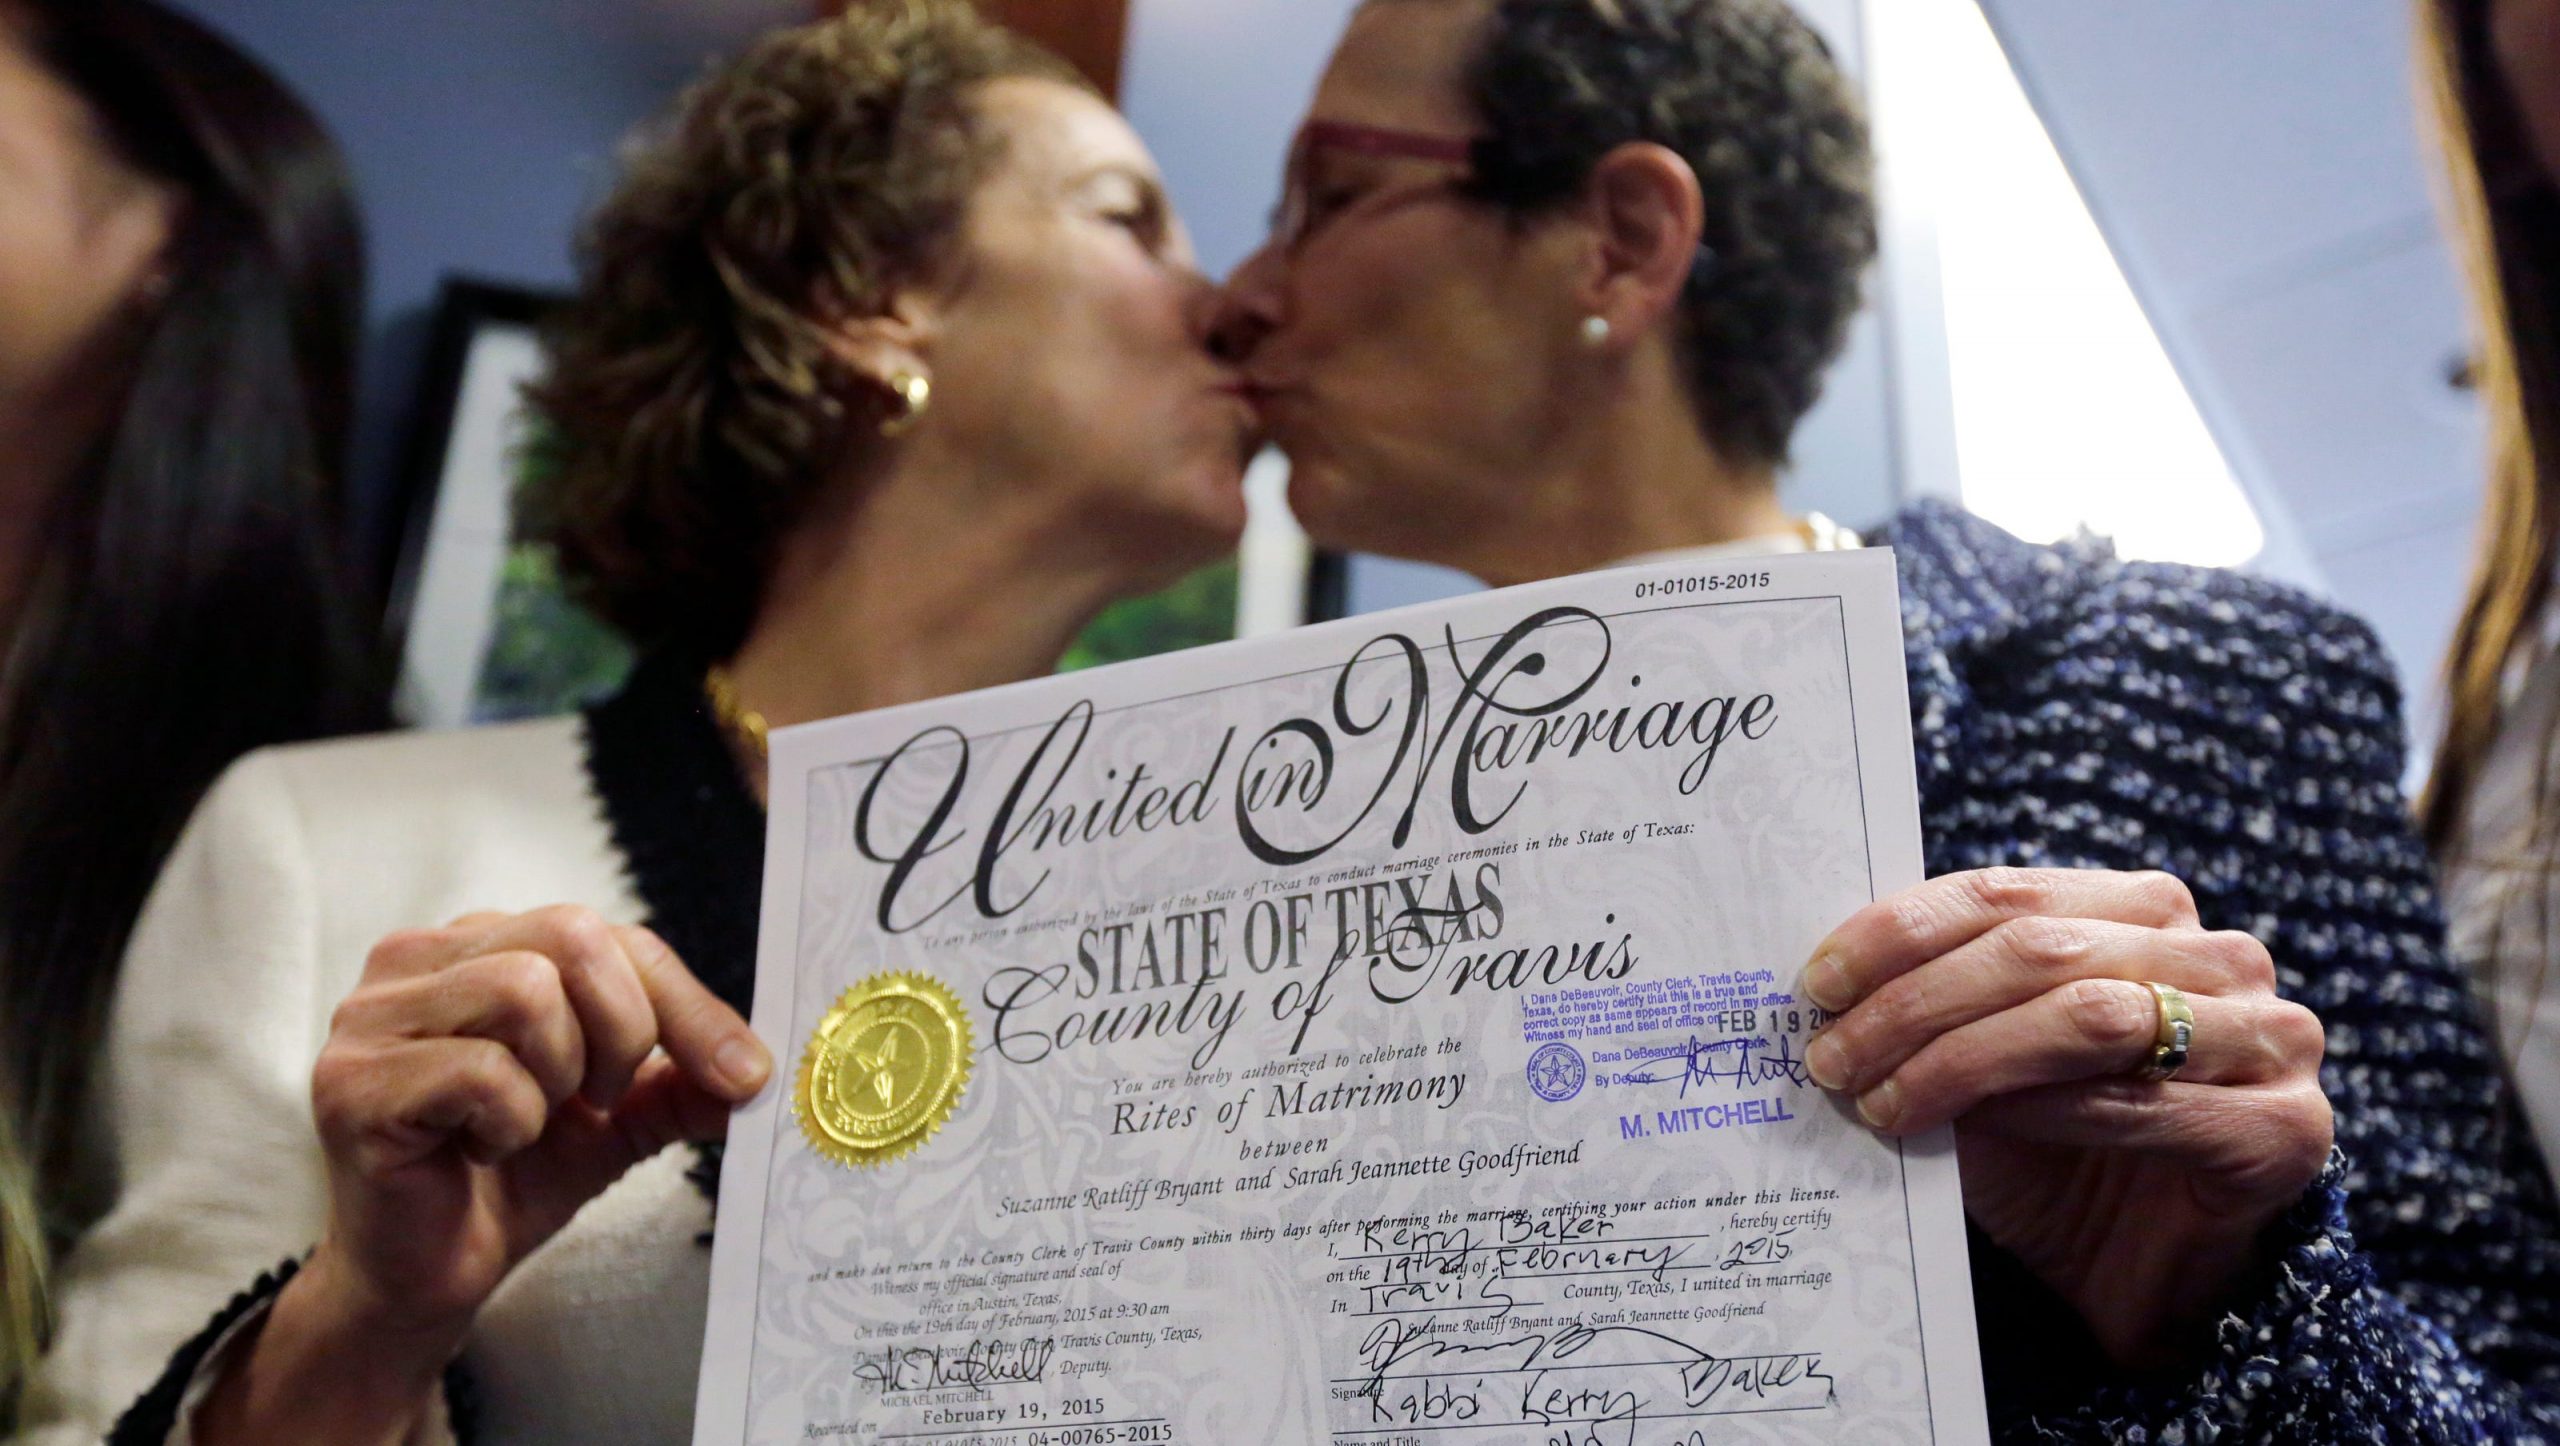 Same-sex marriage equality in the US and around the world